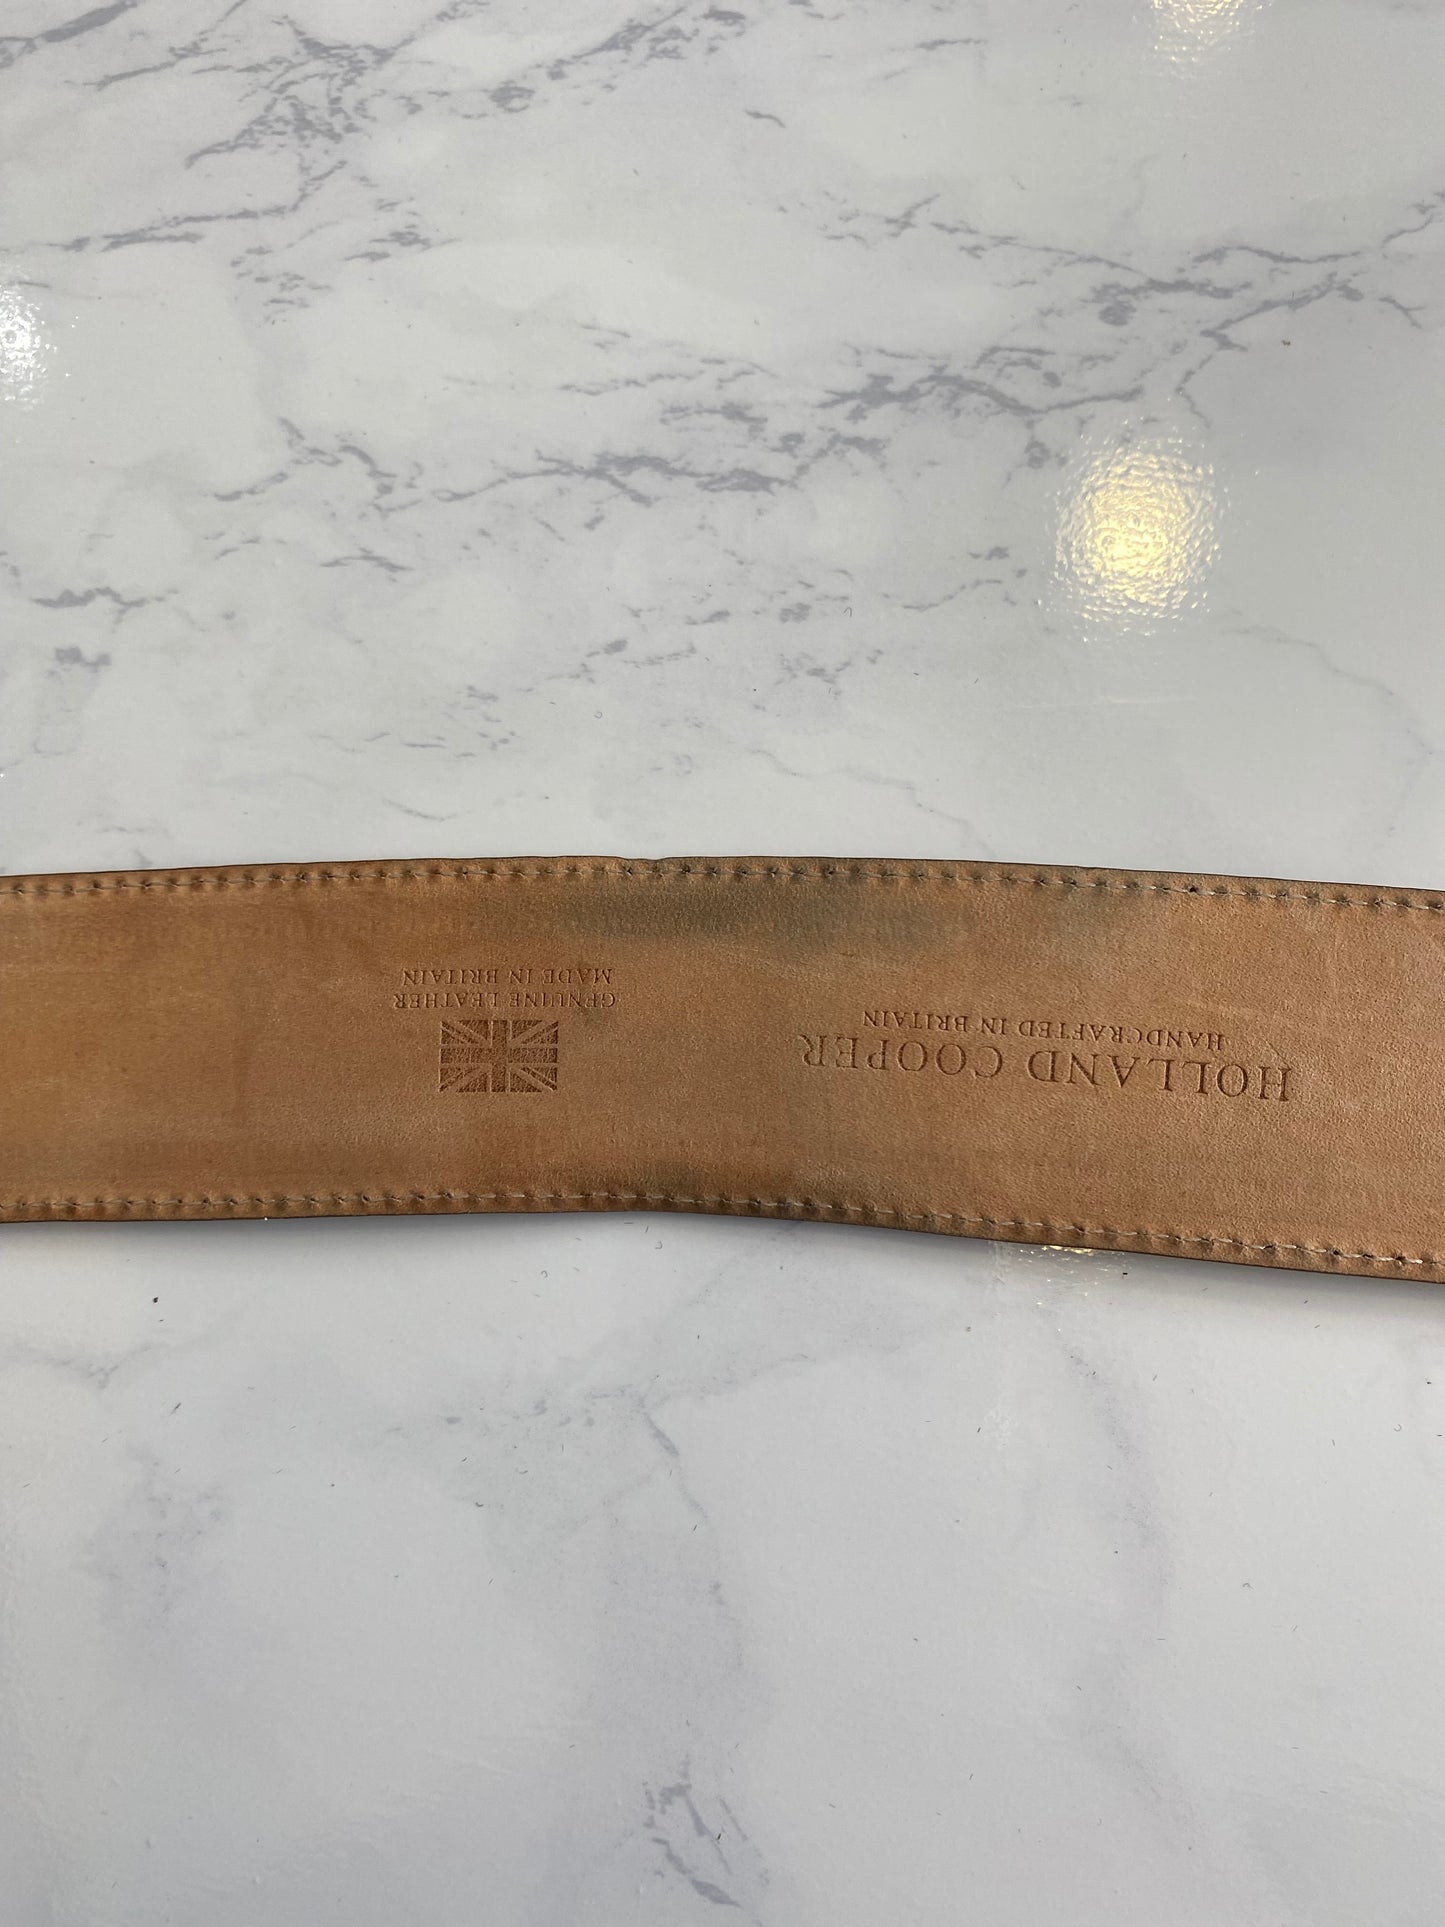 Holland Cooper Tan Croc Leather Belt with Box